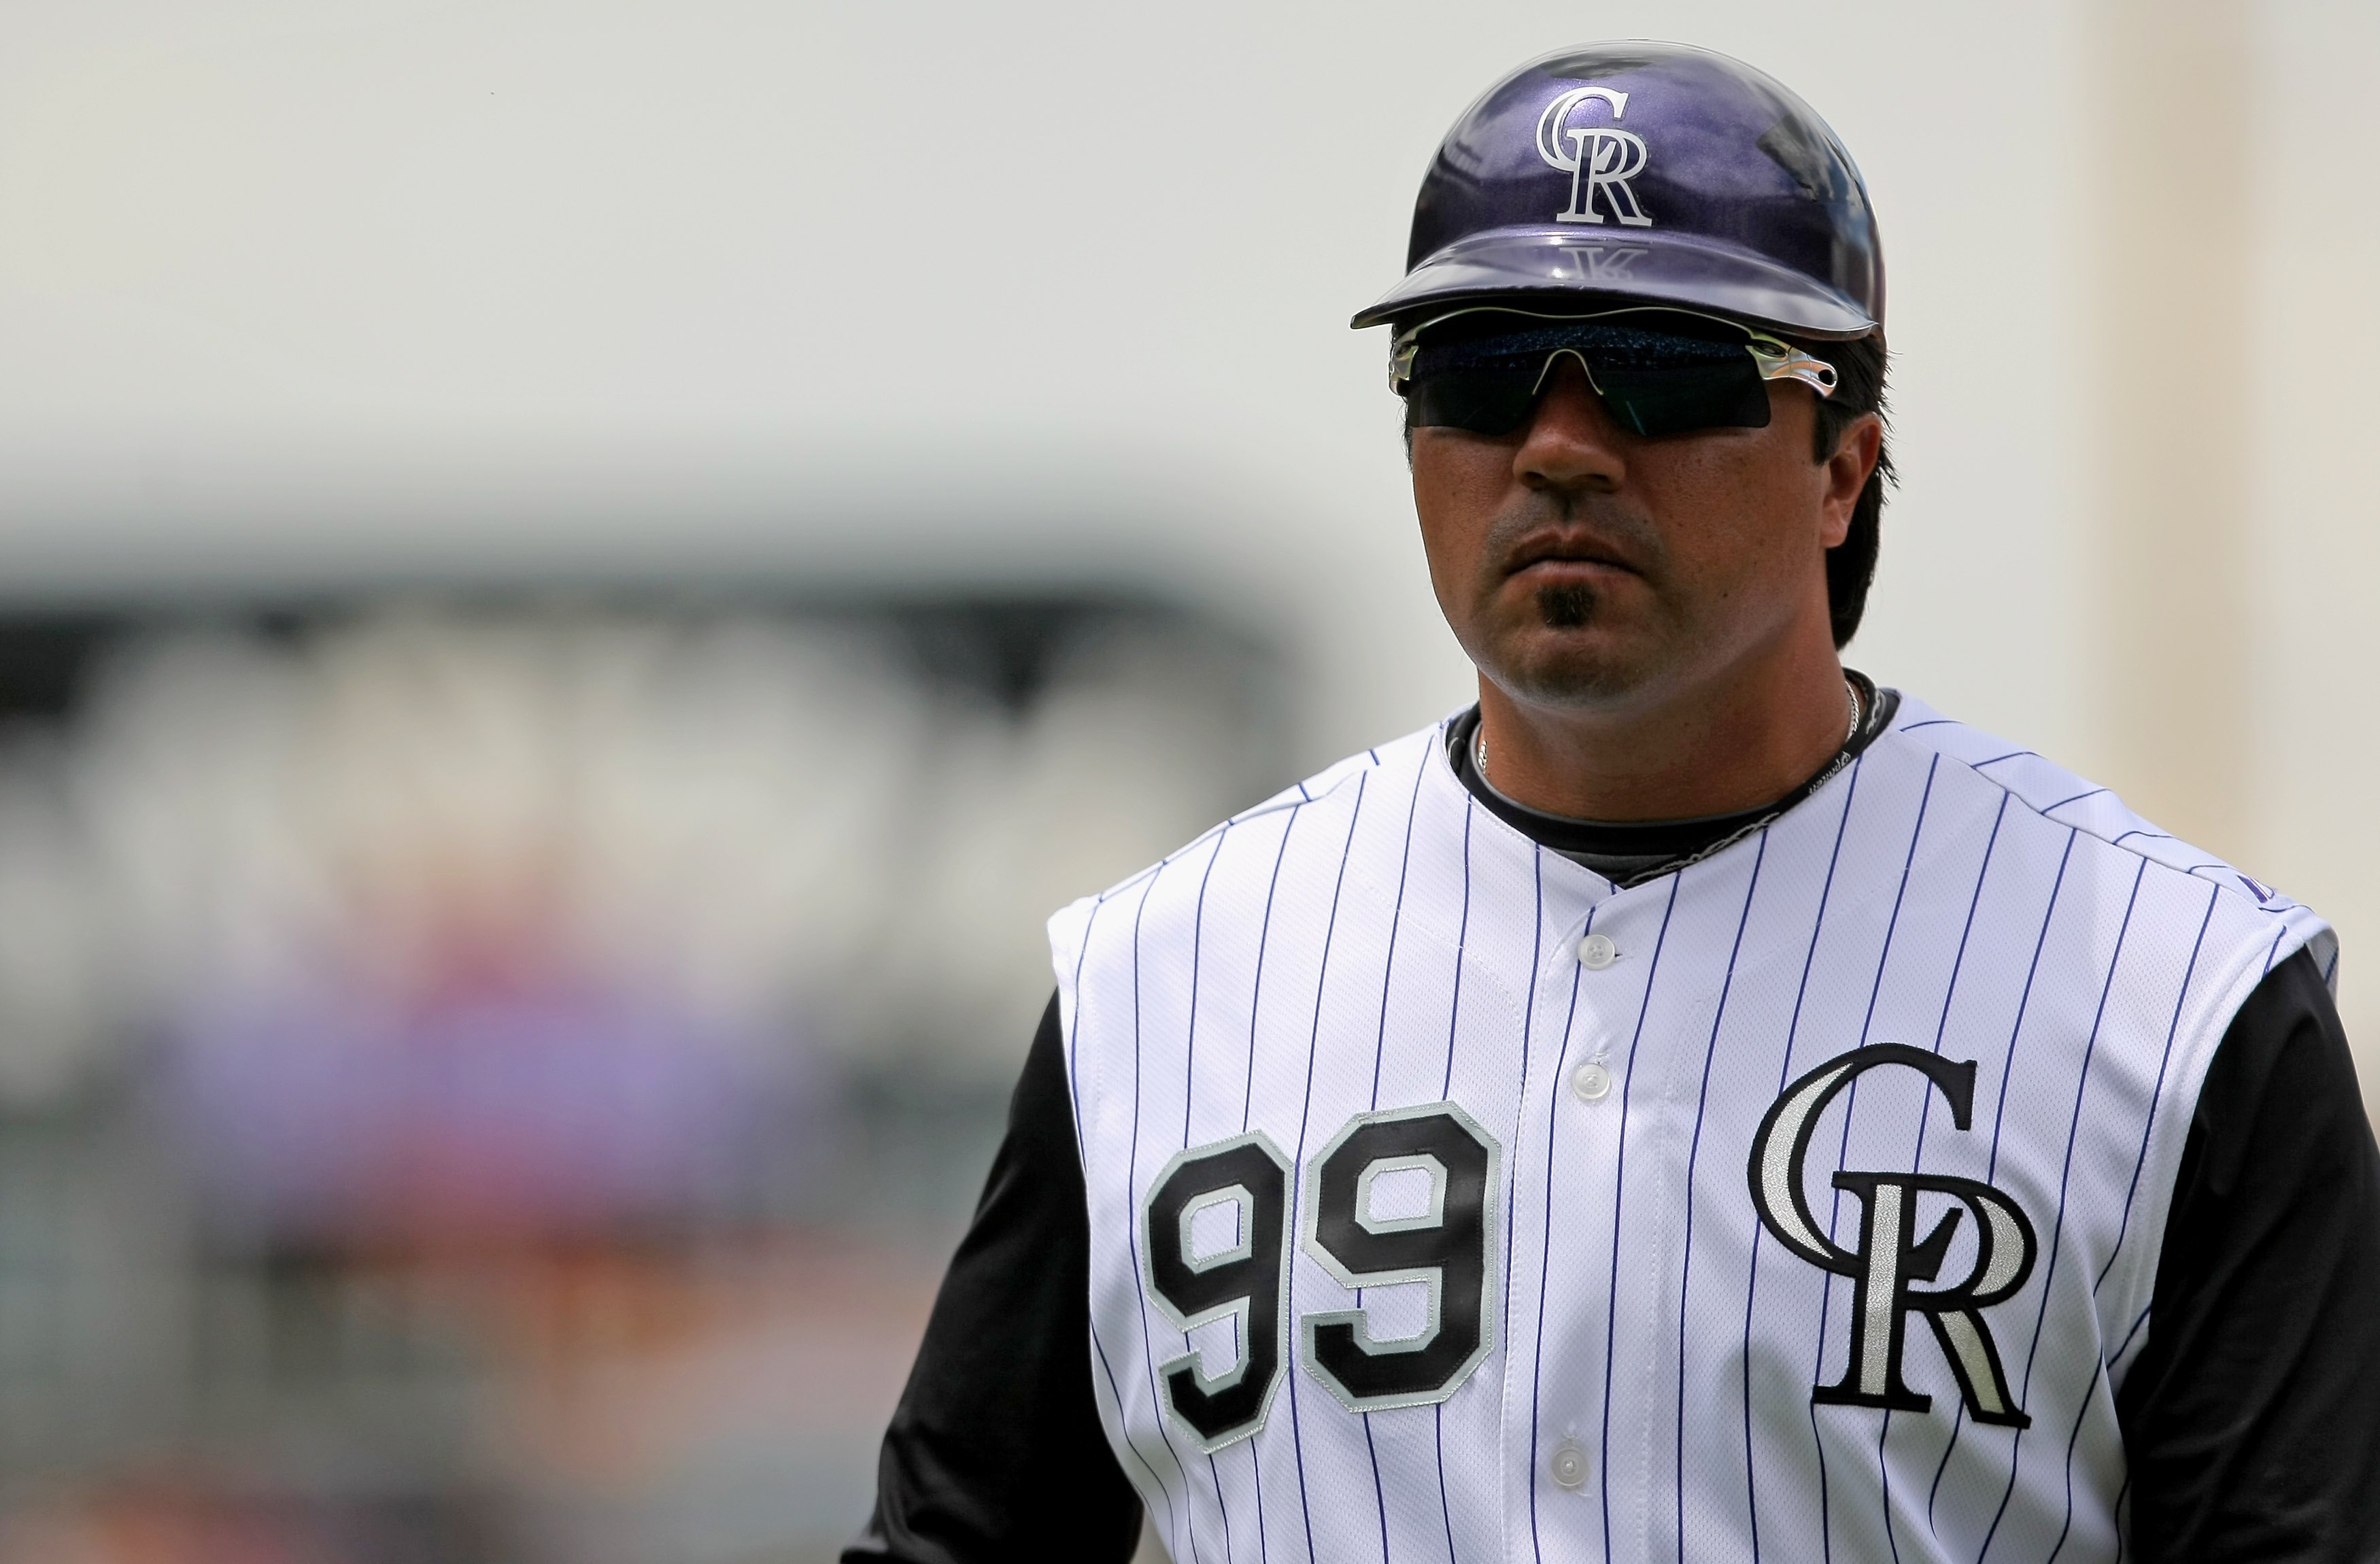 DENVER - MAY 31:  Vinny Castilla #99 of the Colorado Rockies coaches first base against the San Diego Padres during MLB action at Coors Field on May 31, 2009 in Denver, Colorado. The Padres defeated the Rockies 5-2.  (Photo by Doug Pensinger/Getty Images)